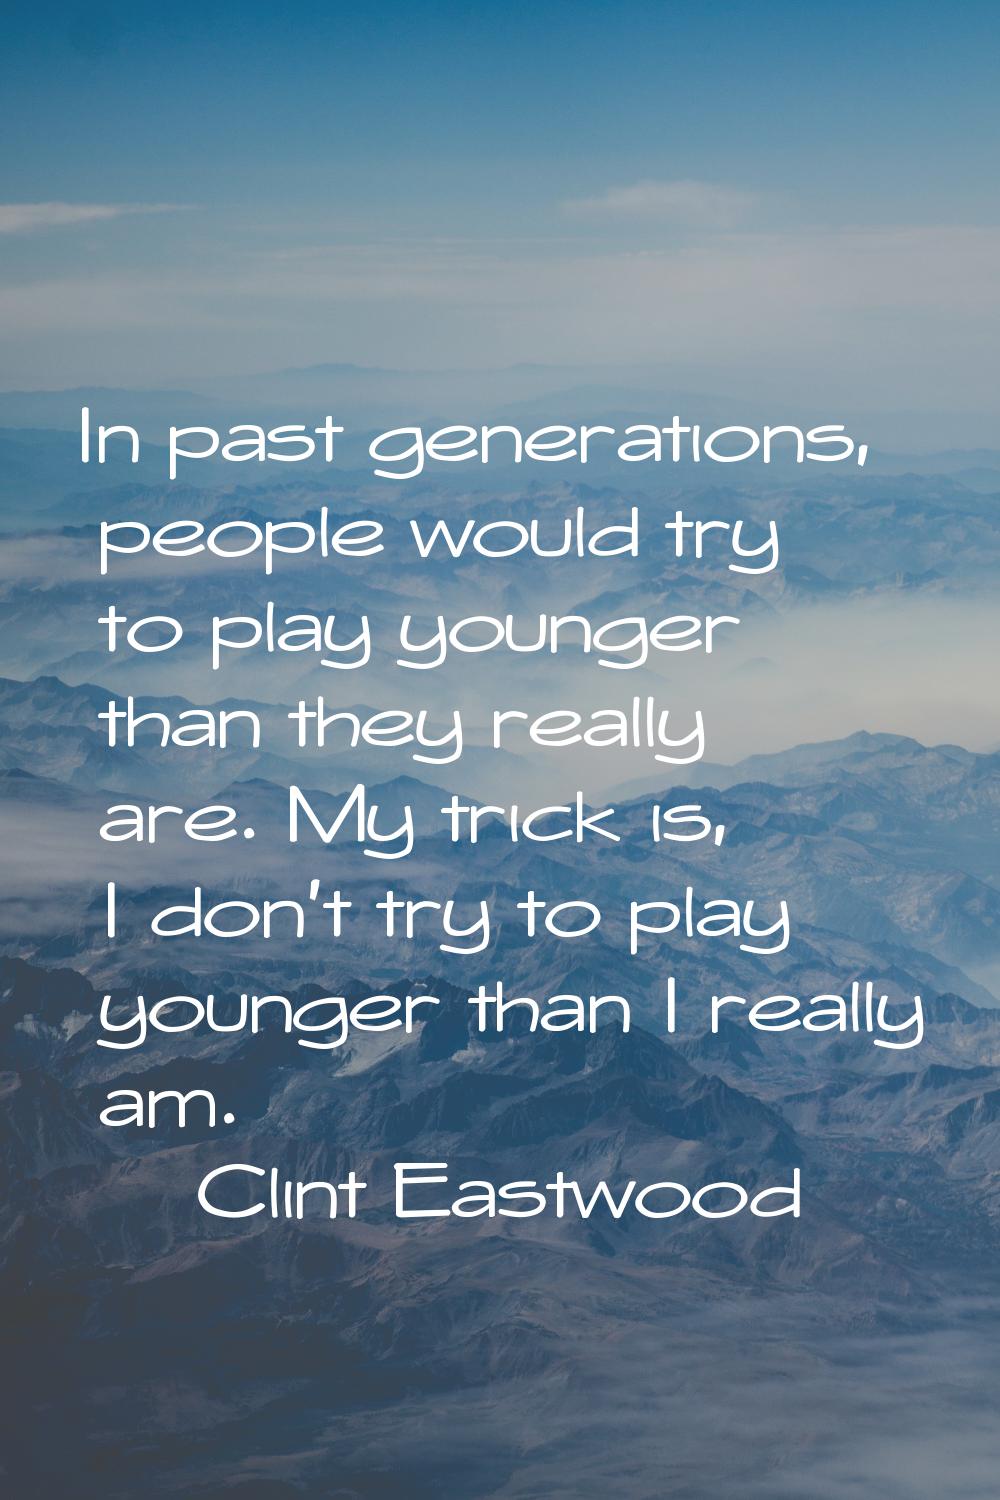 In past generations, people would try to play younger than they really are. My trick is, I don't tr